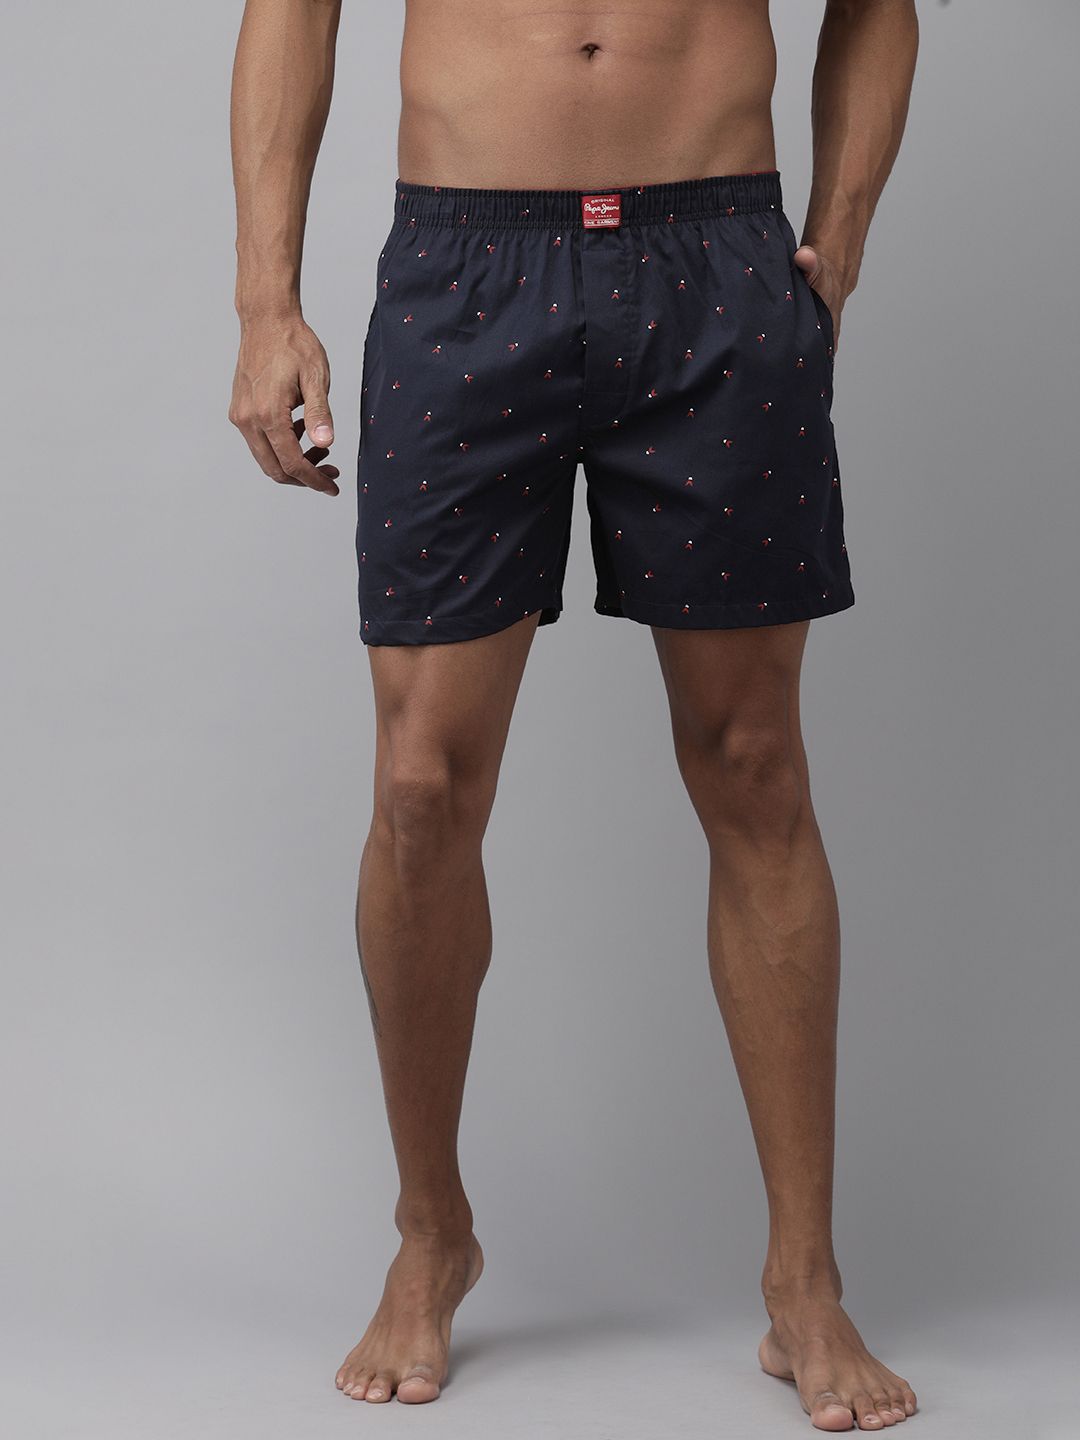 Pepe Jeans Men Navy Blue Micro Ditsy Printed Lounge Shorts